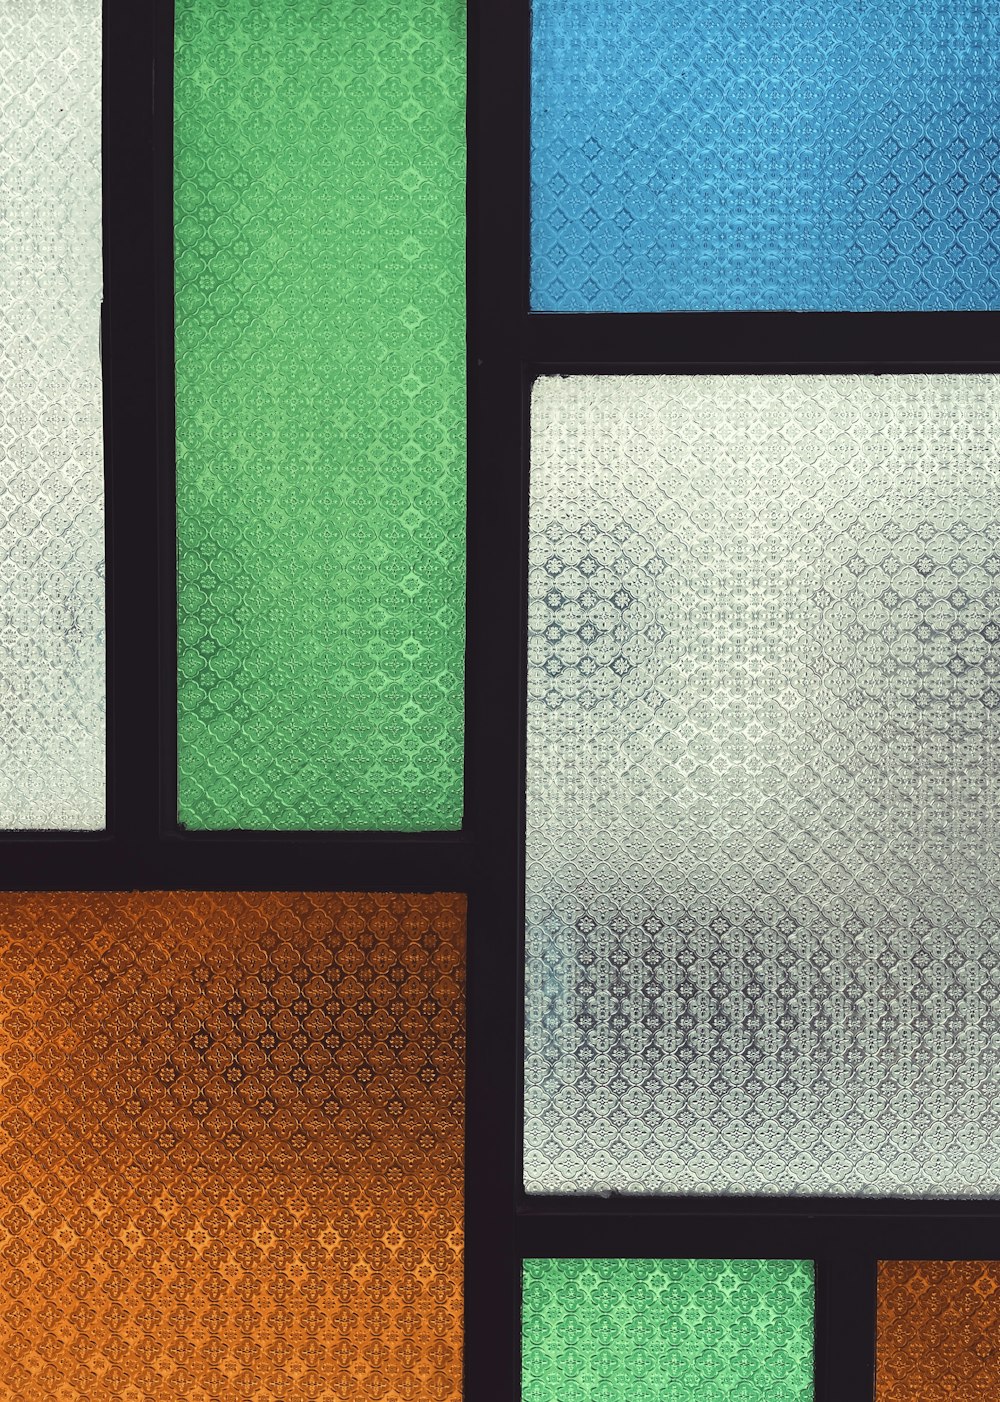 a close up of a glass window with different colors